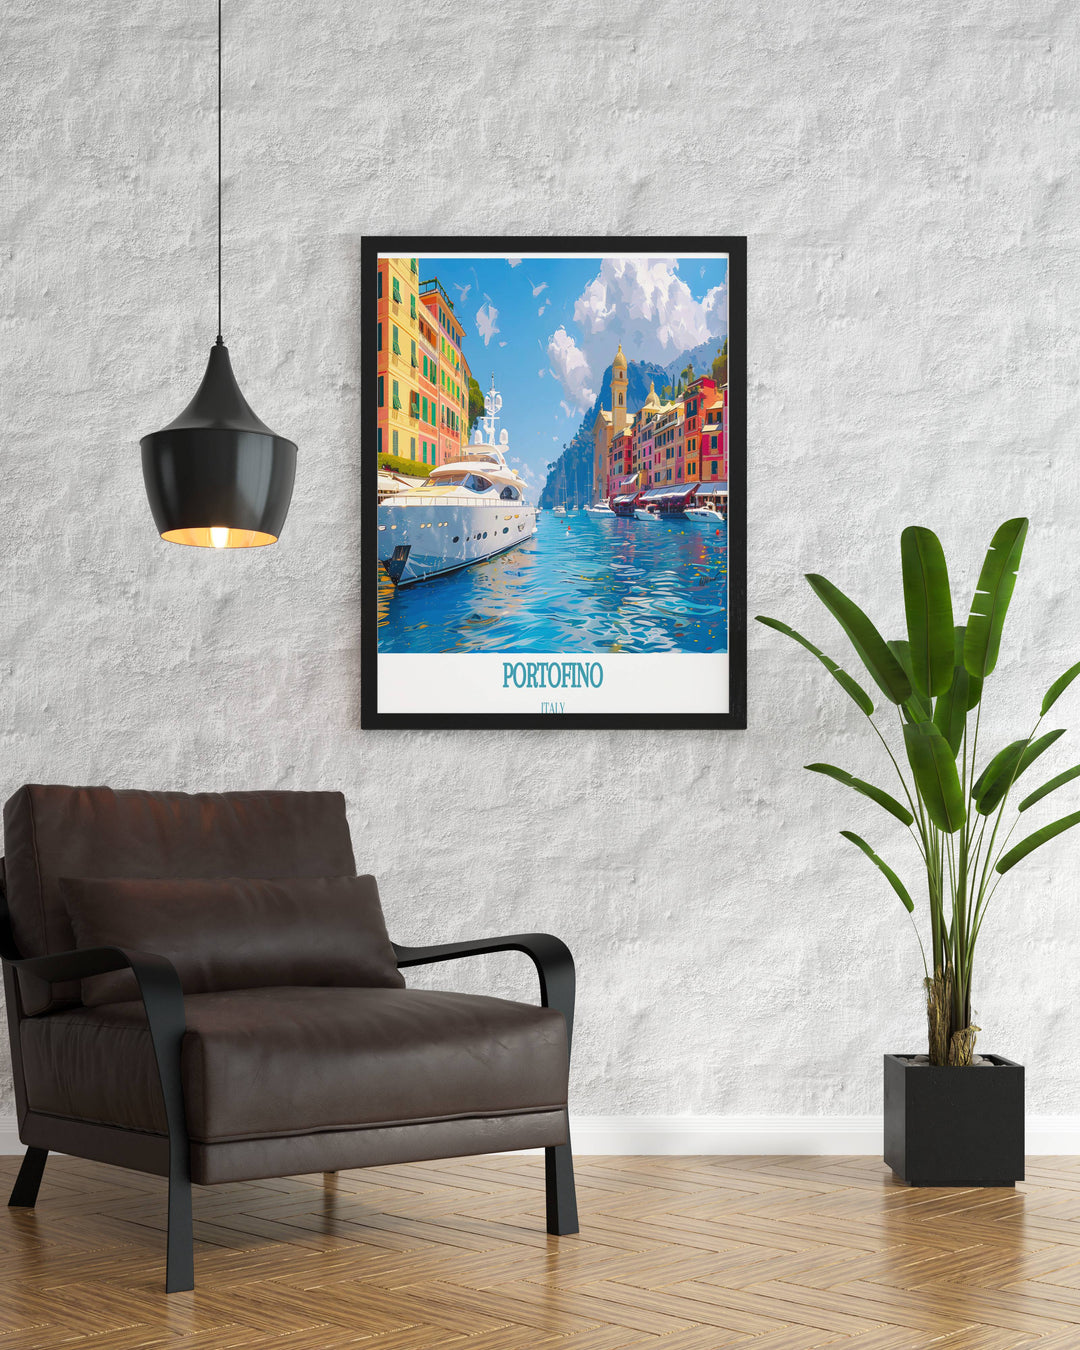 Beautiful Framed Art of Portofino, depicting the serene harbor and colorful houses of this iconic Italian village, ideal for any living space.